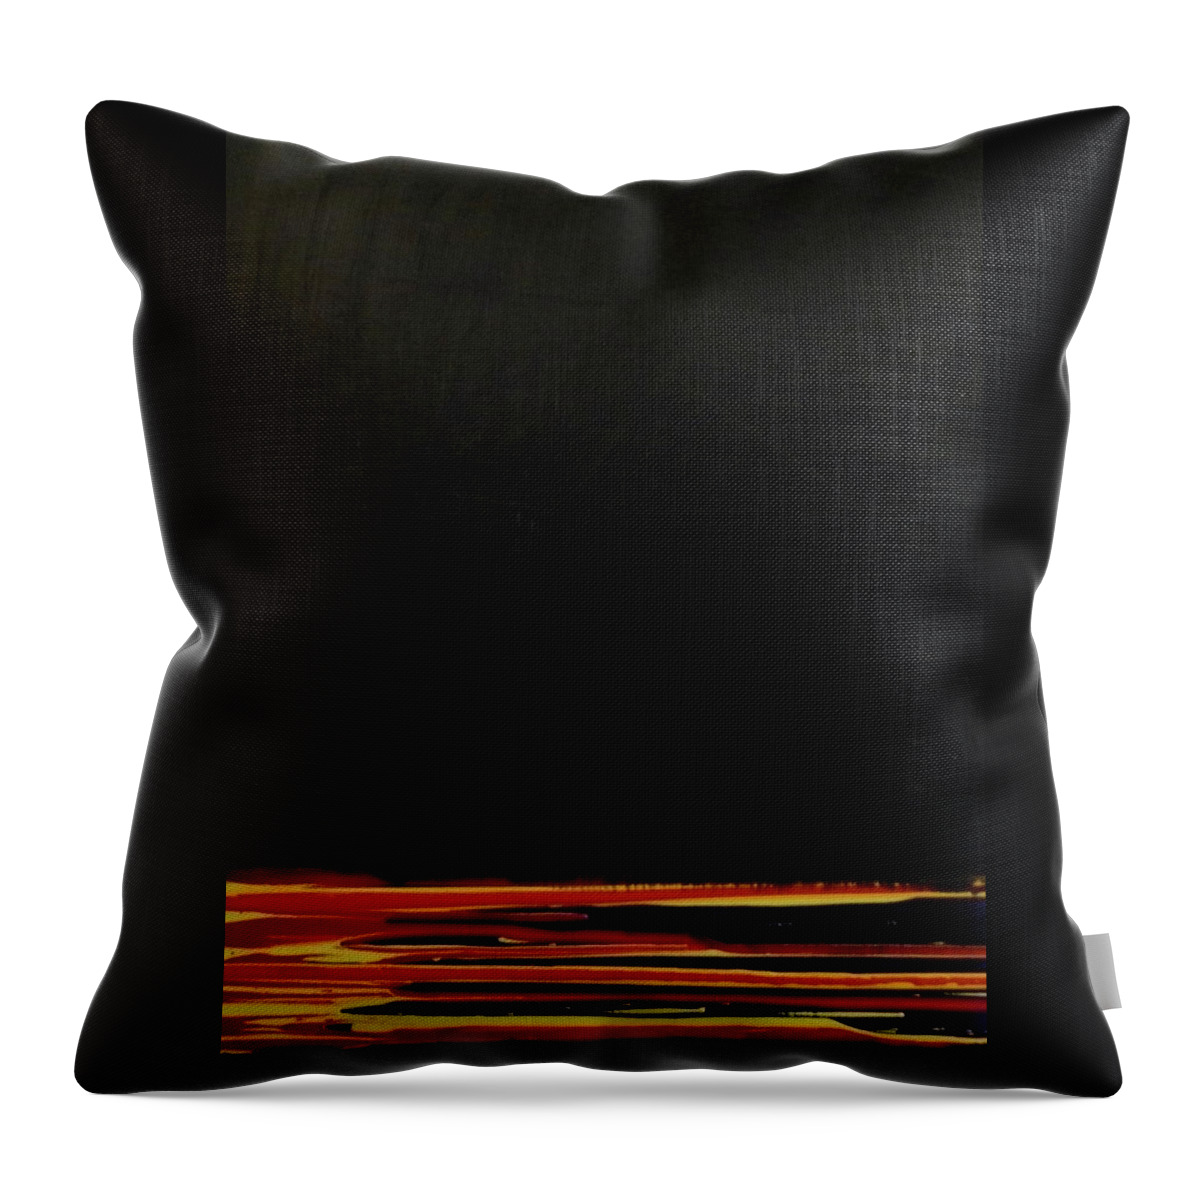 Black Throw Pillow featuring the painting Black with Stripes by Monika Shepherdson